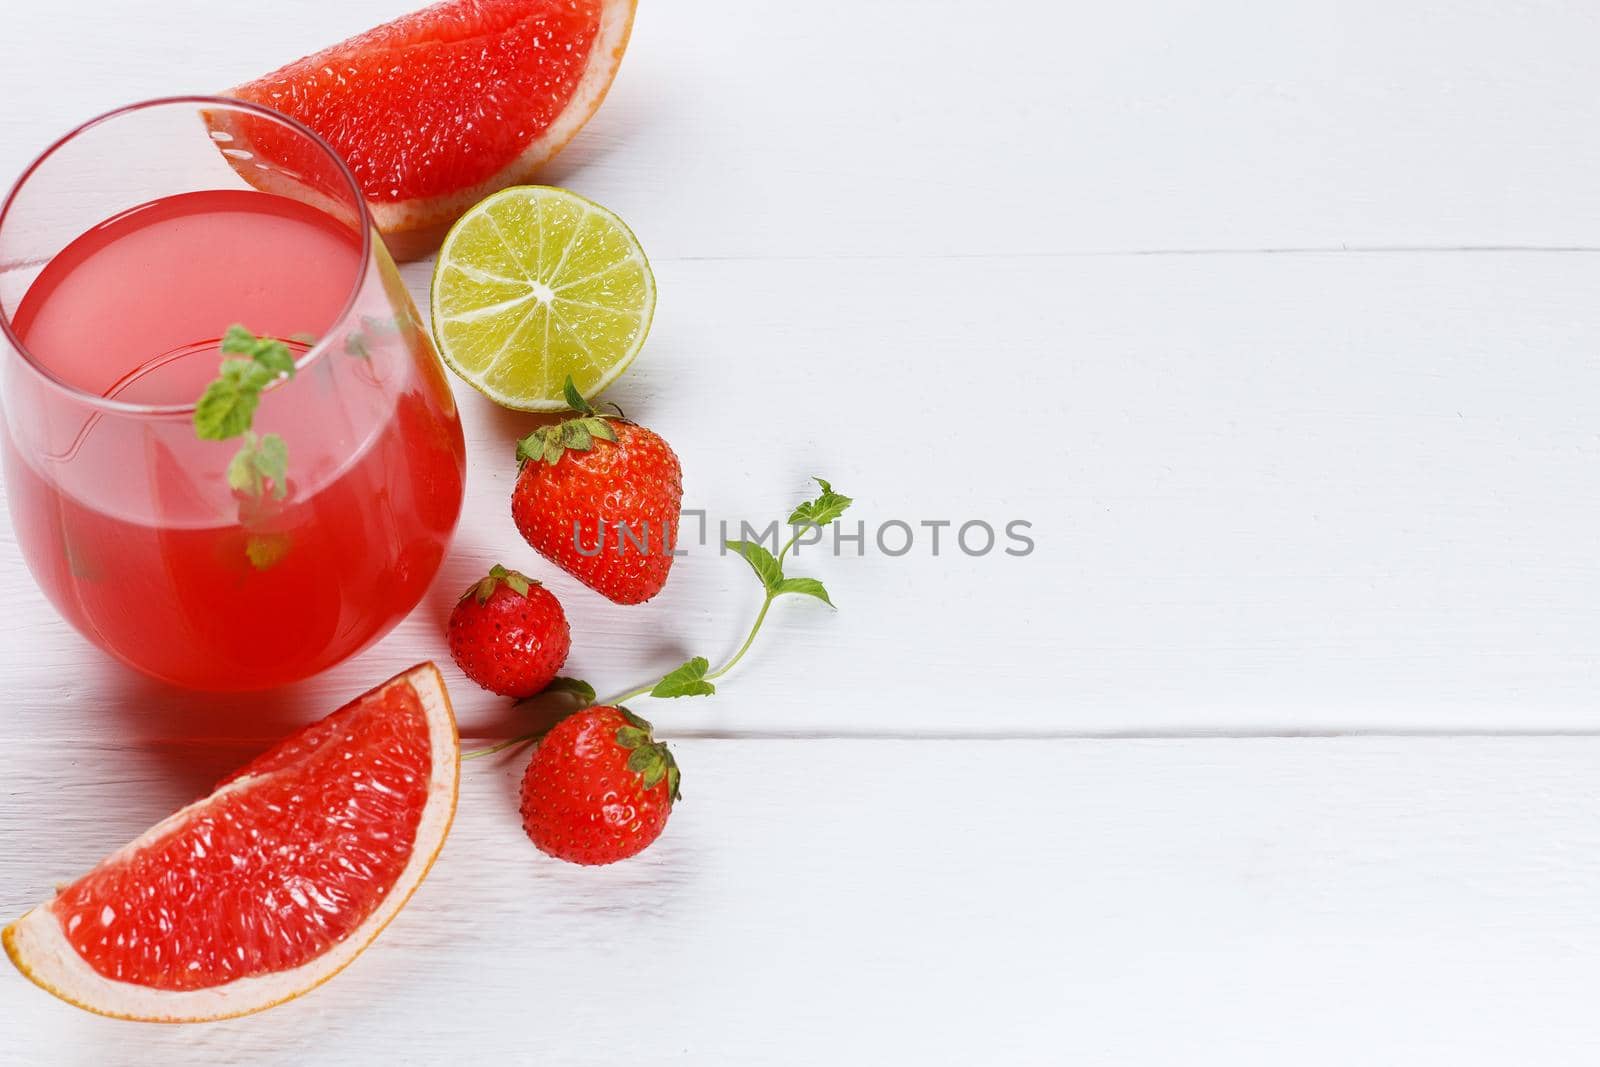 Fresh grapefruit juice in a glass with grapefruit slices, lime and mint on a wooden background. Copy space, selective focus by lara29